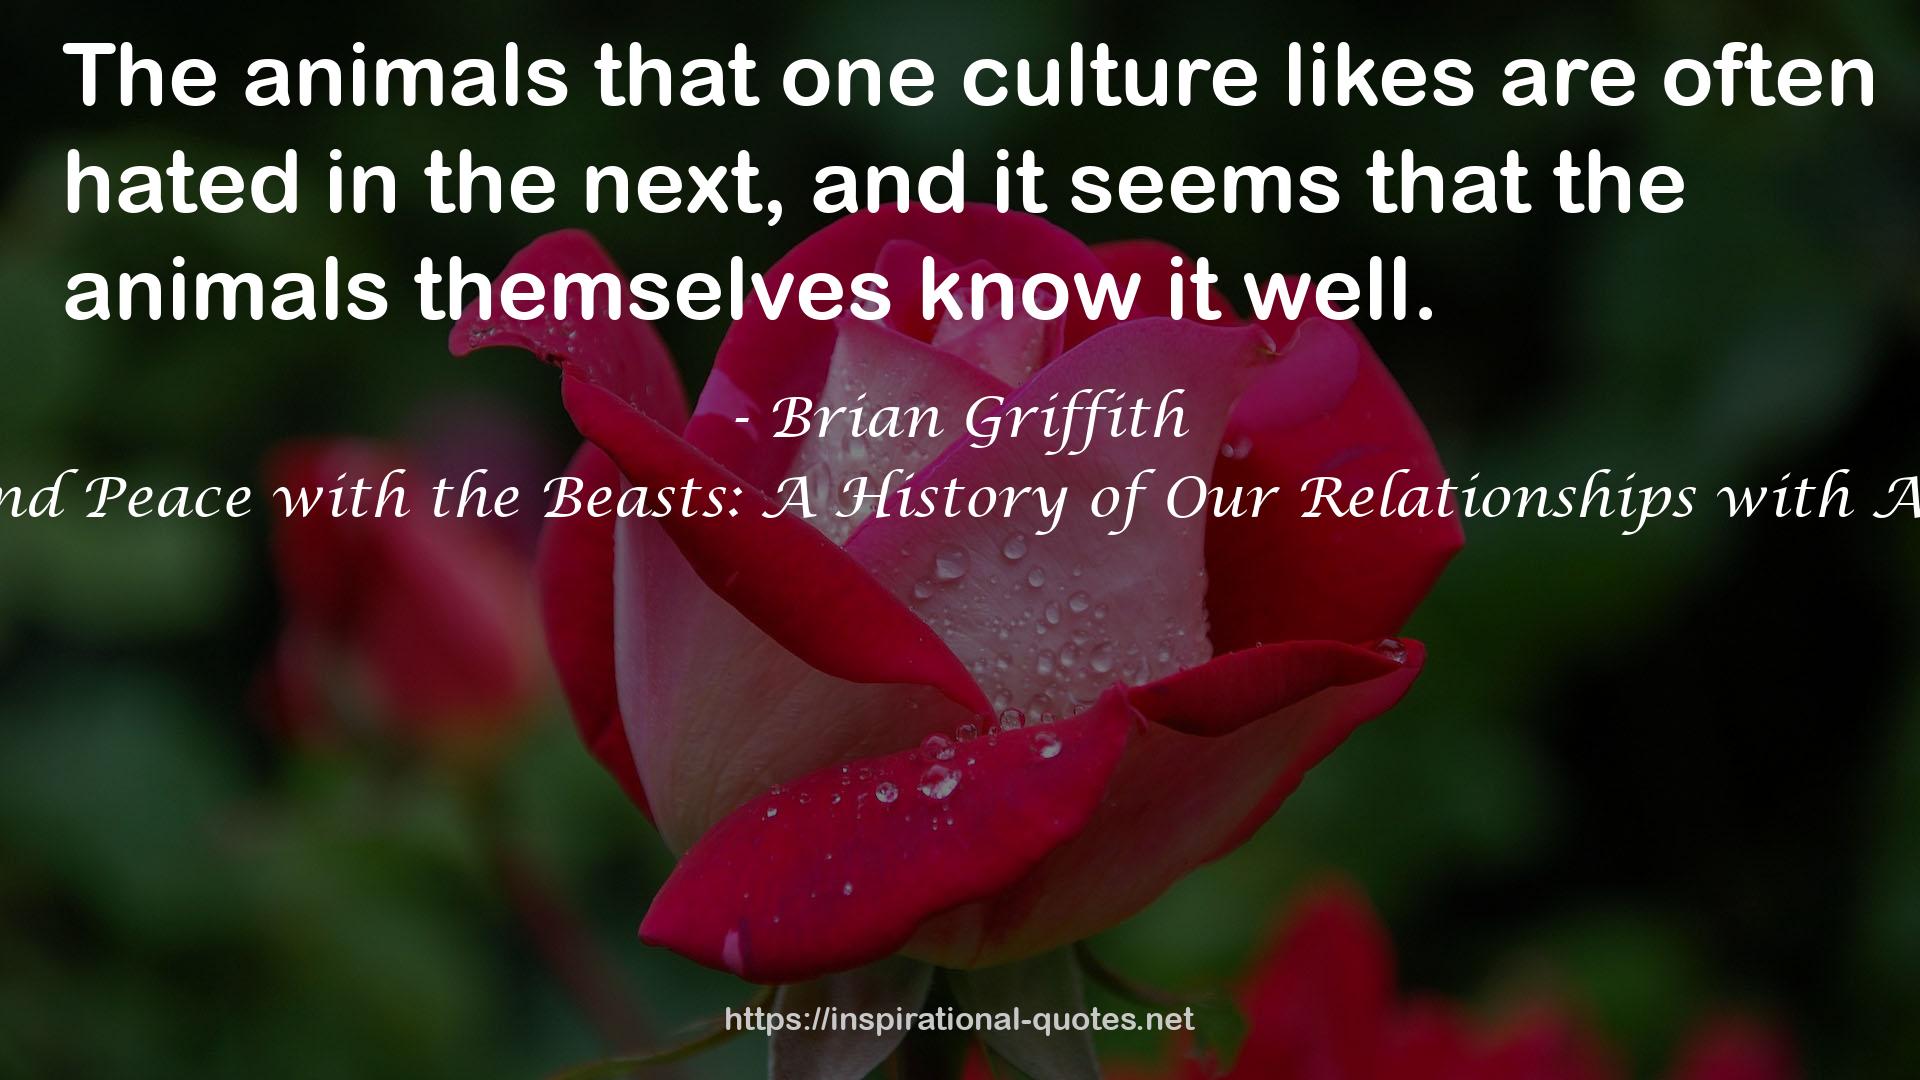 Brian Griffith QUOTES